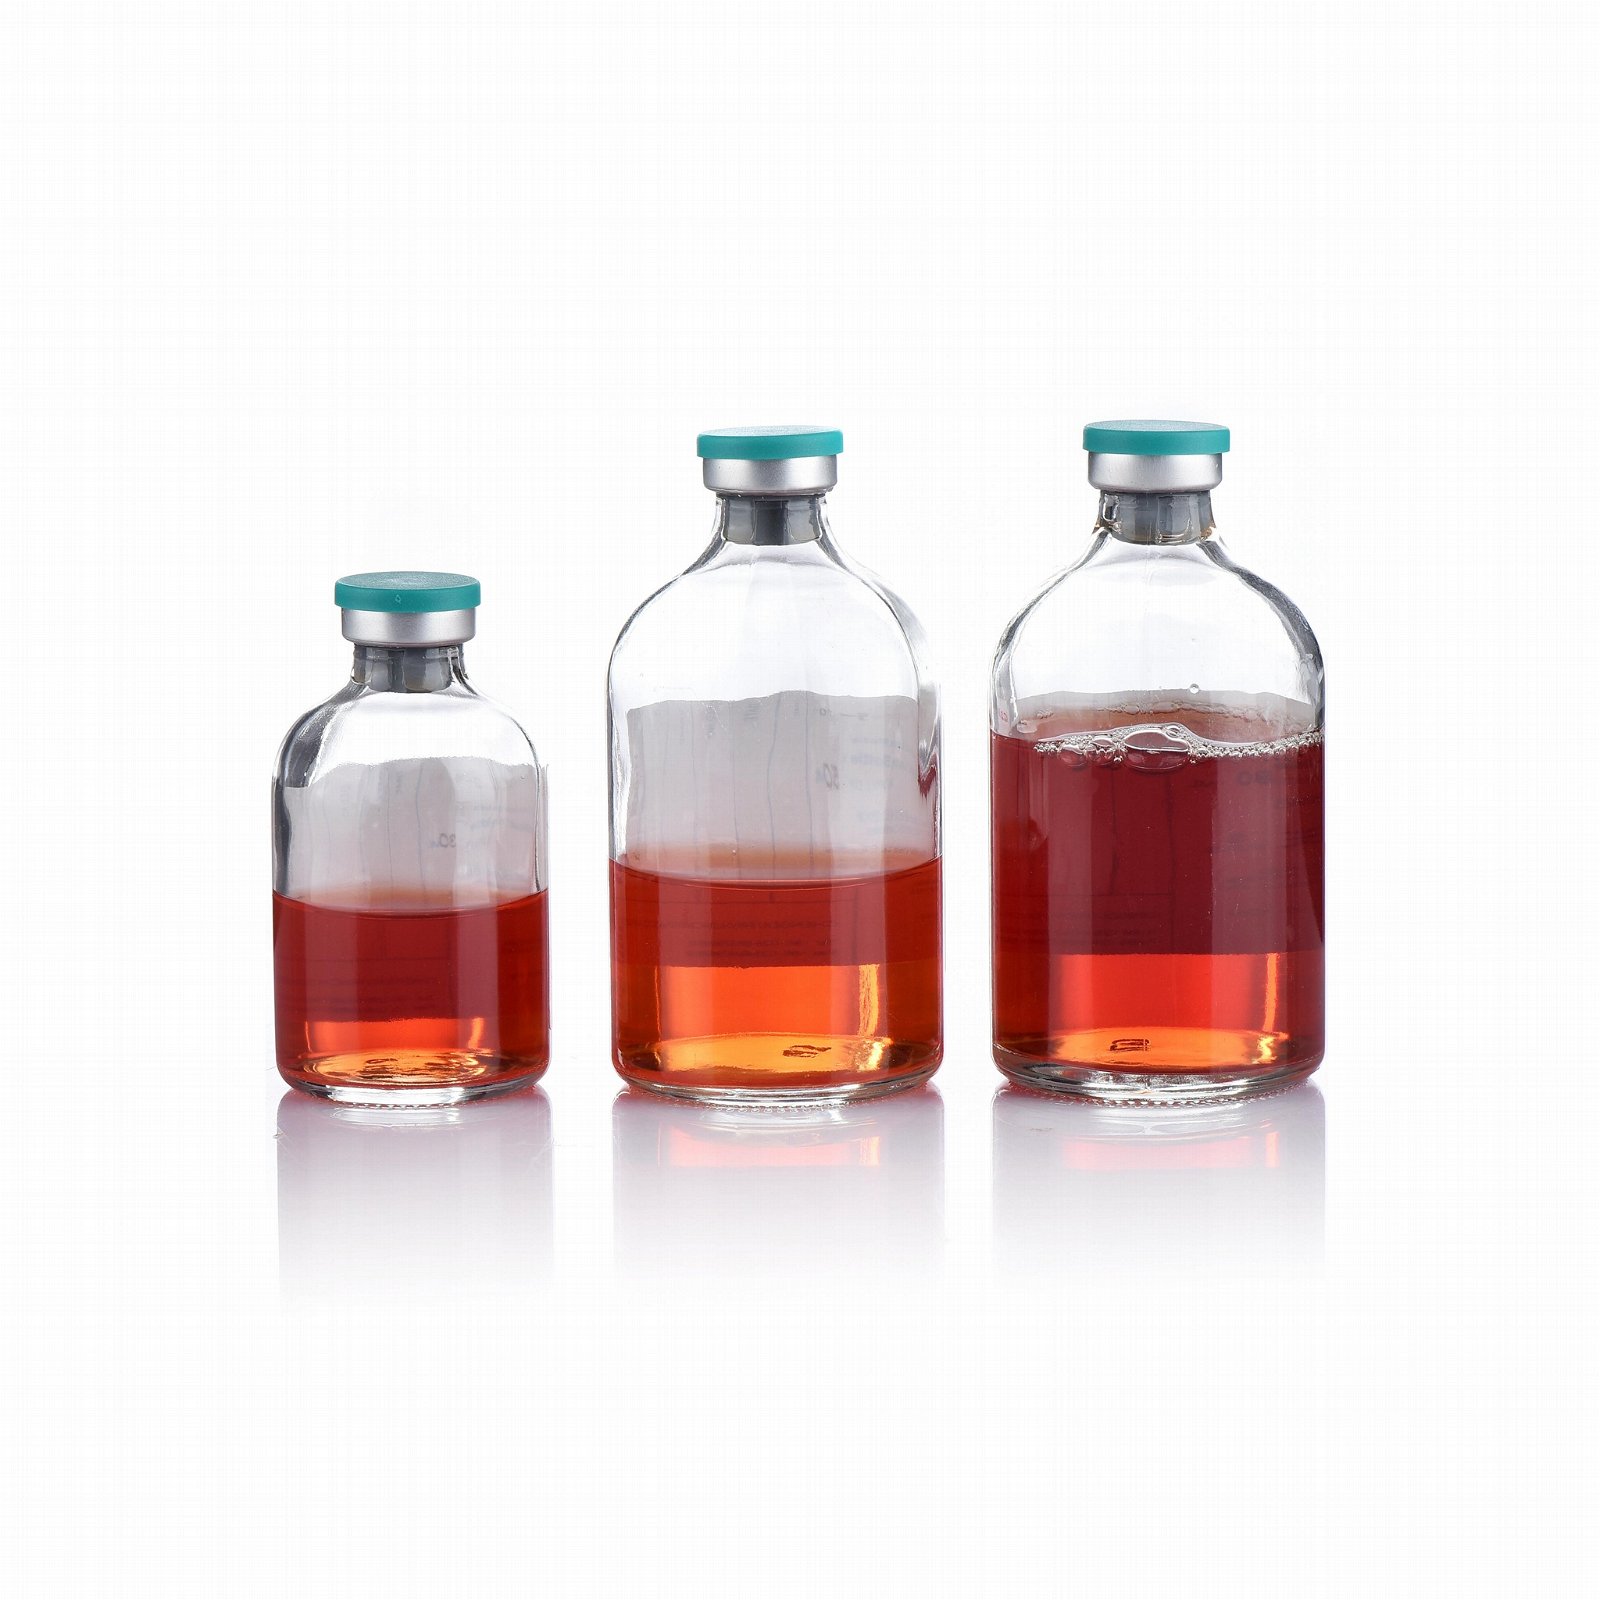 Blood Culturing Bottles for Manual Operation, Aerobic/Anaerobic 2